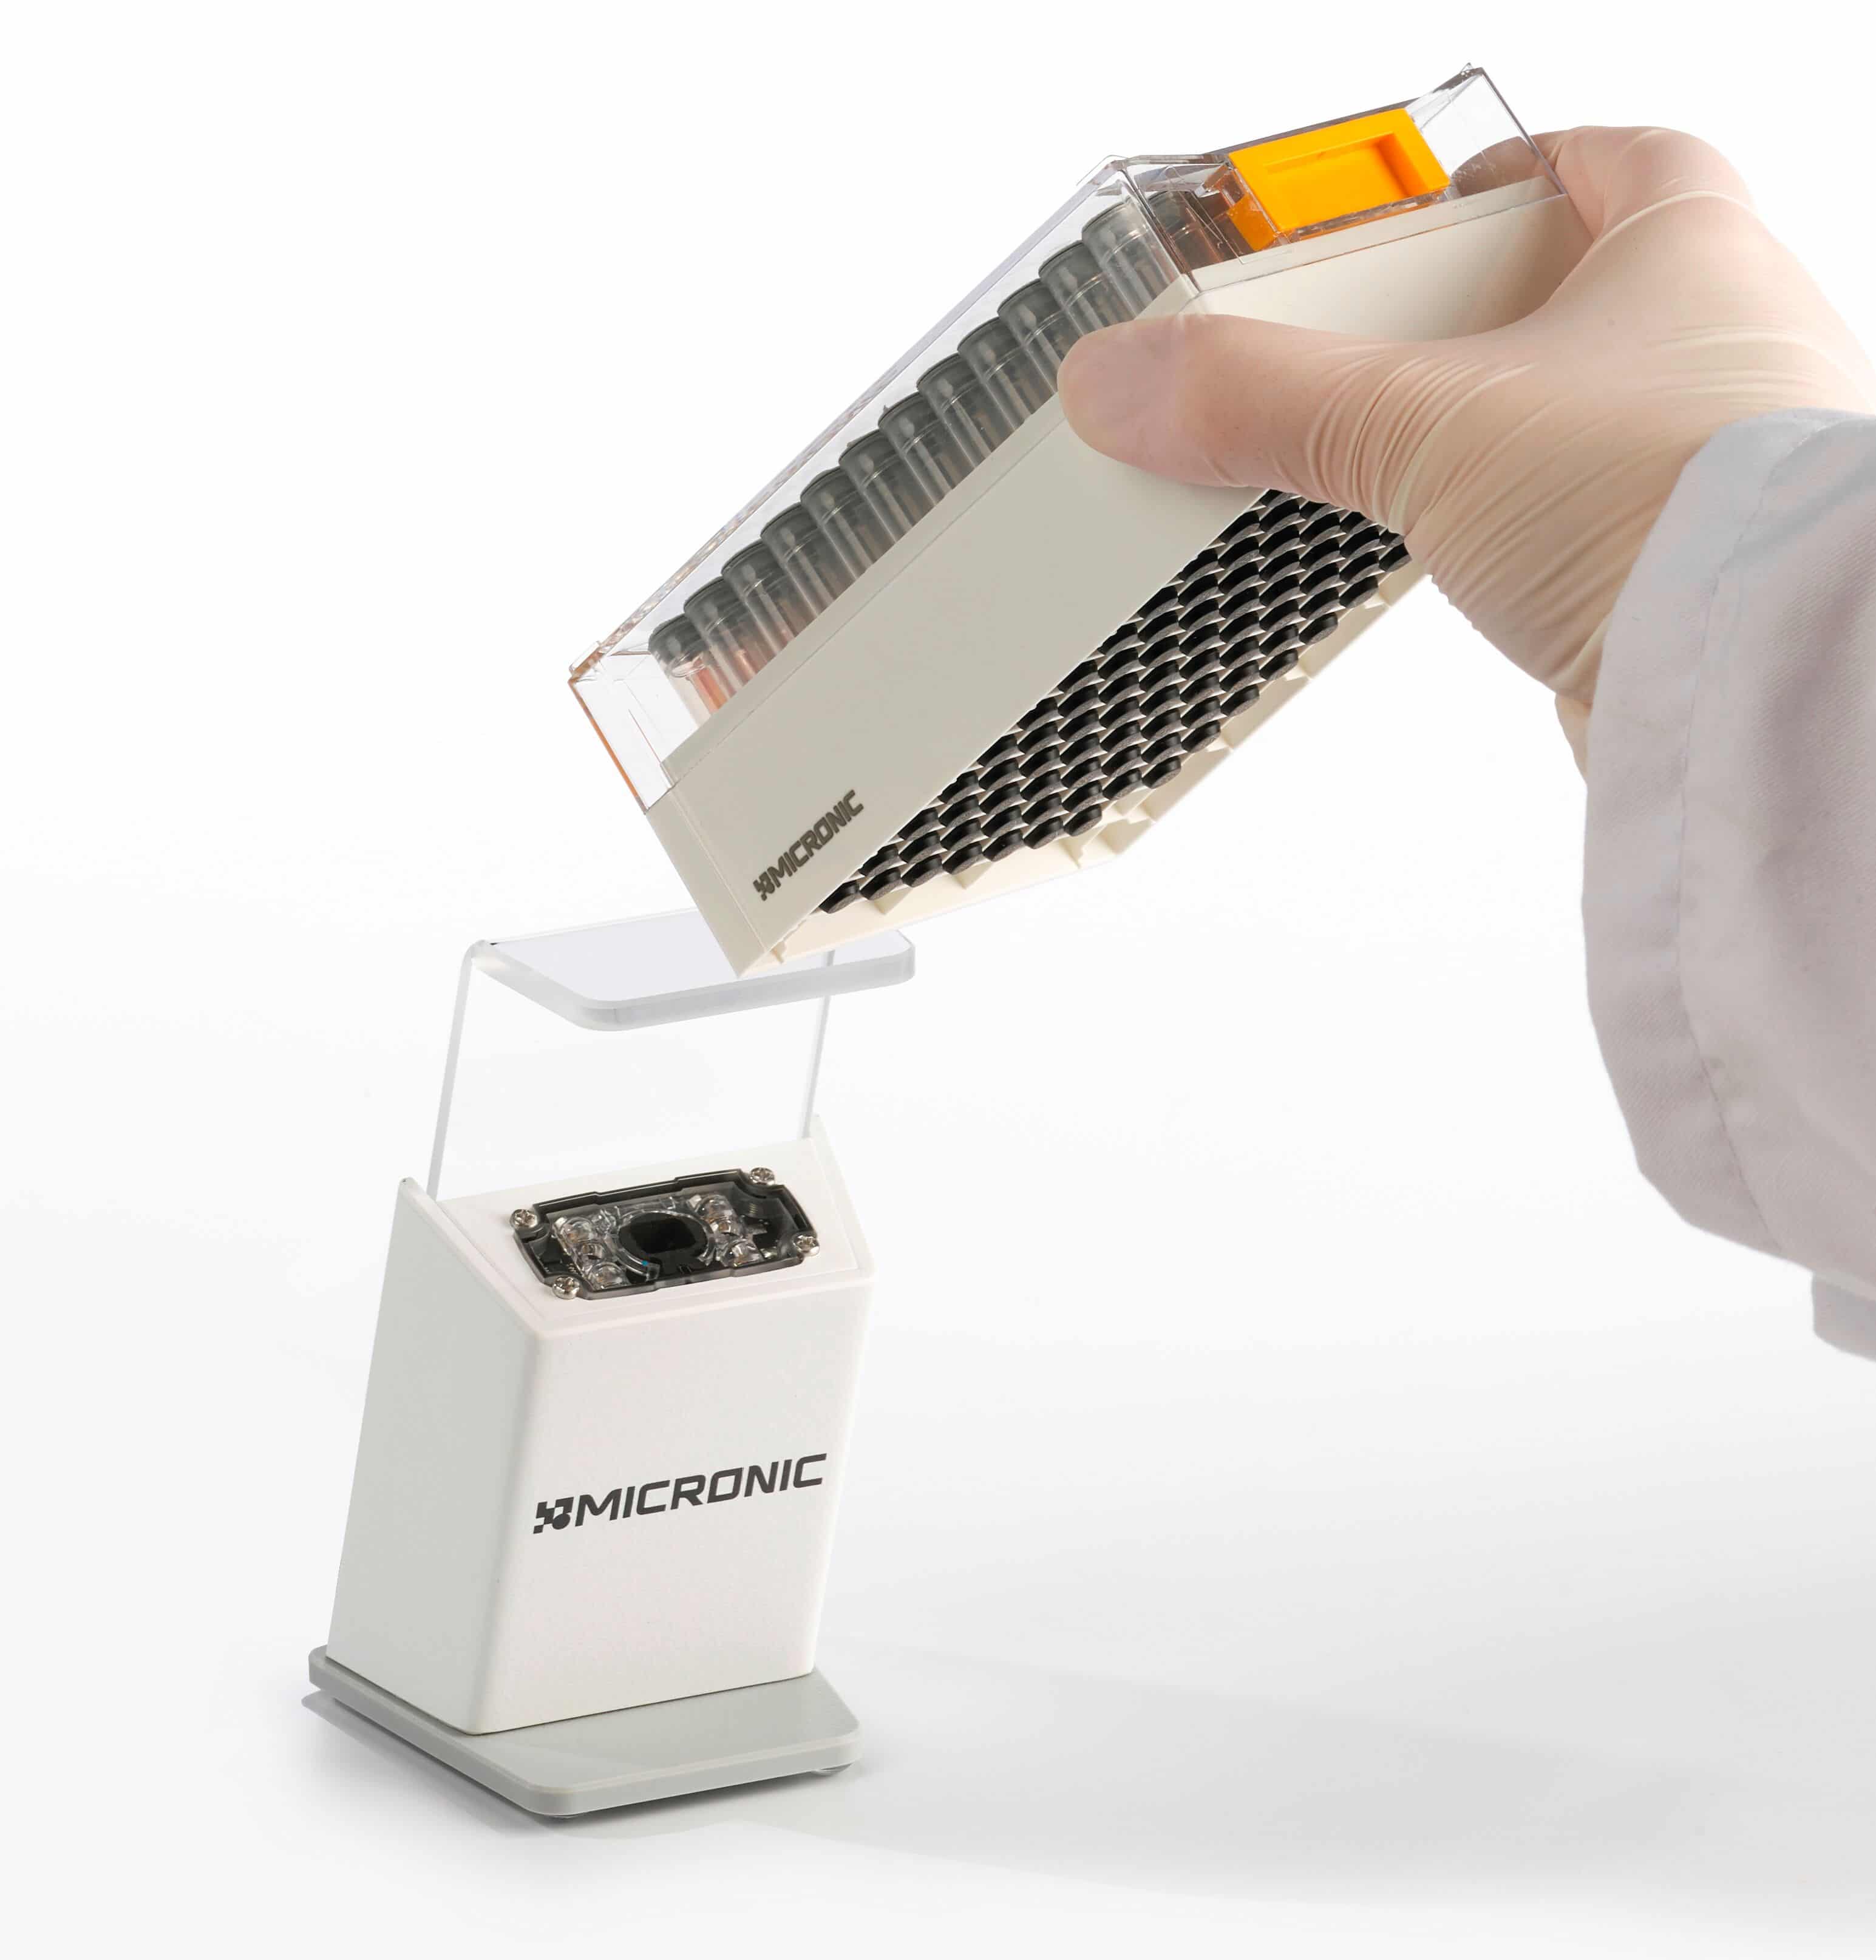 The Micronic tube reader DT500 being used to scan the 1D barcode on a Micronic hybrid tube